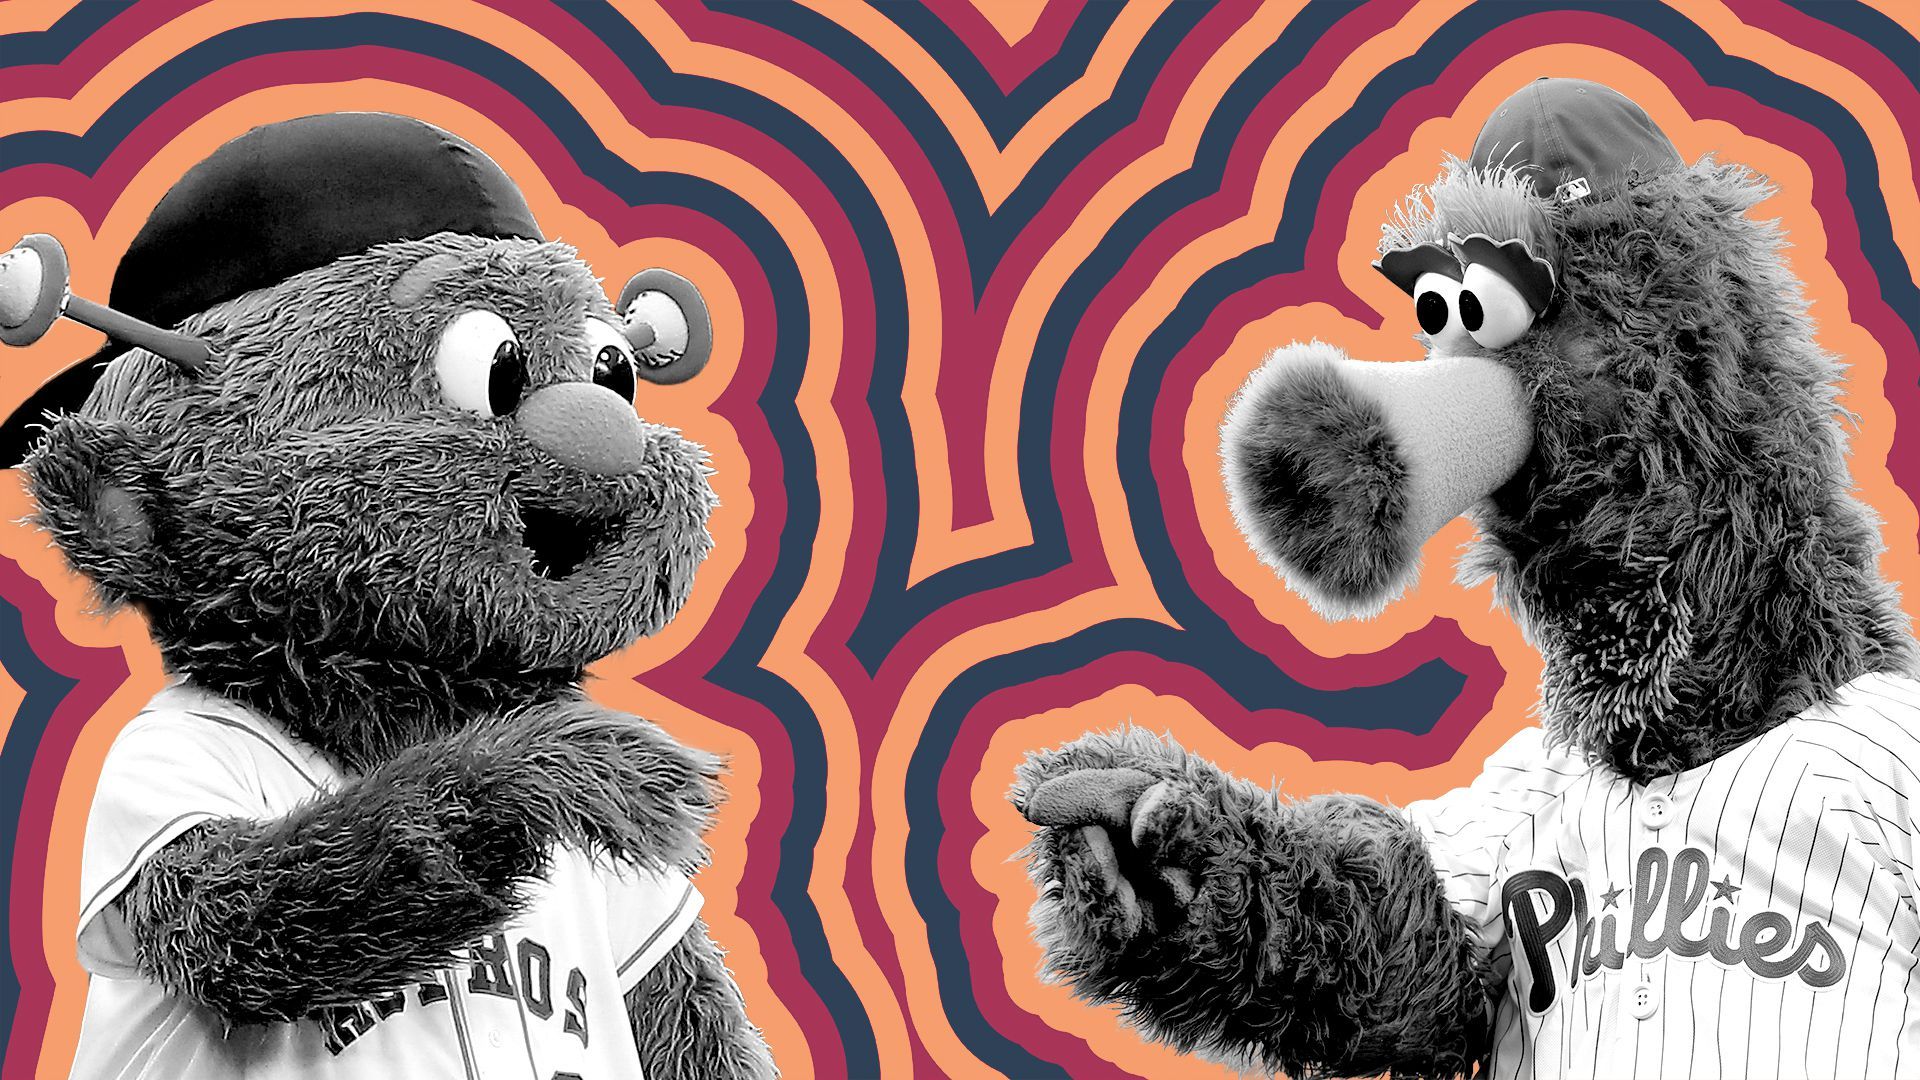 Photo illustration of Orbit, the Houston Astros' mascot, and the Phillie Phanatic with red, blue and orange lines radiating from them